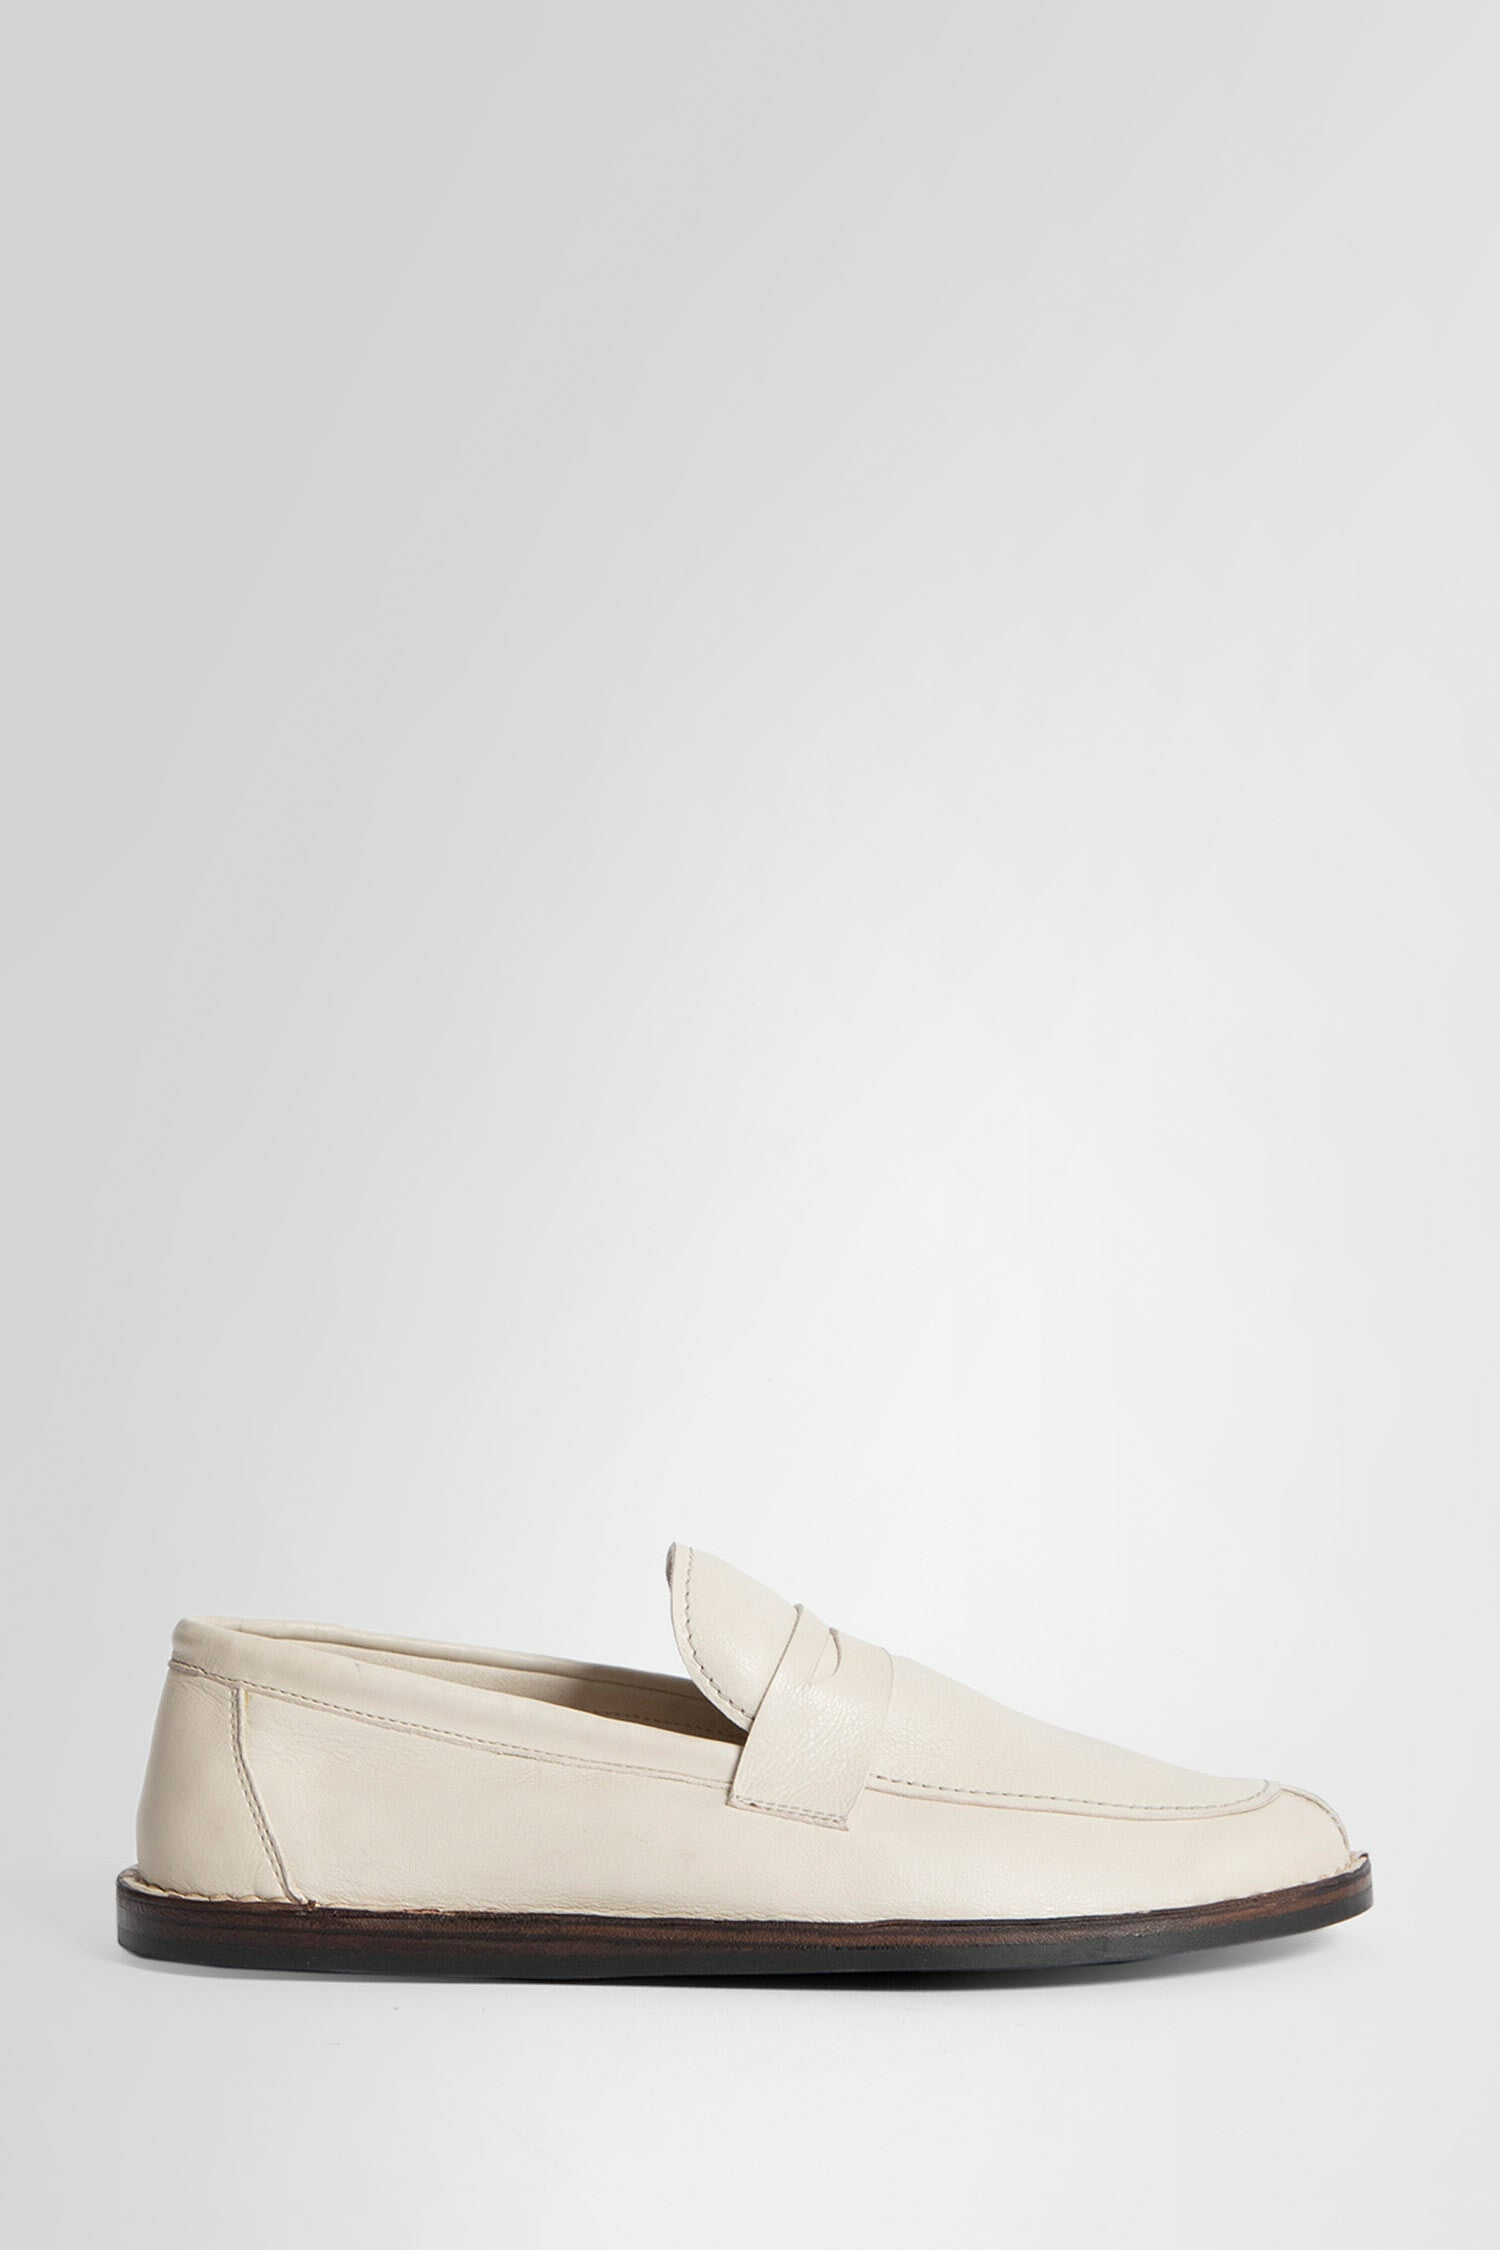 THE ROW WOMAN OFF-WHITE LOAFERS & FLATS